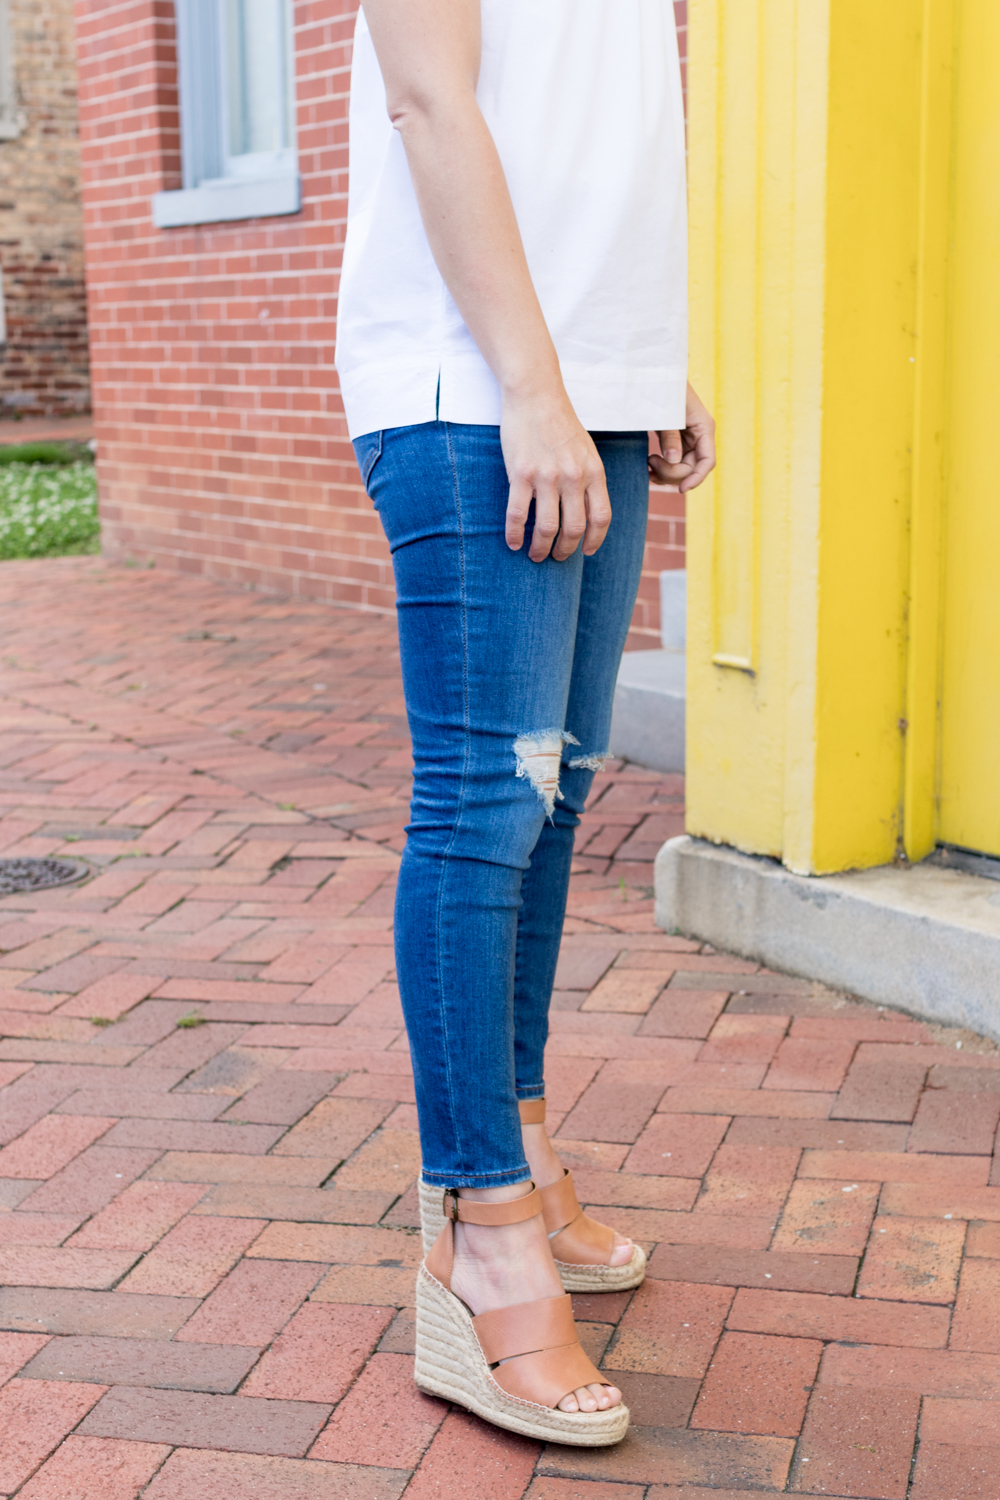 best madewell jeans for petites